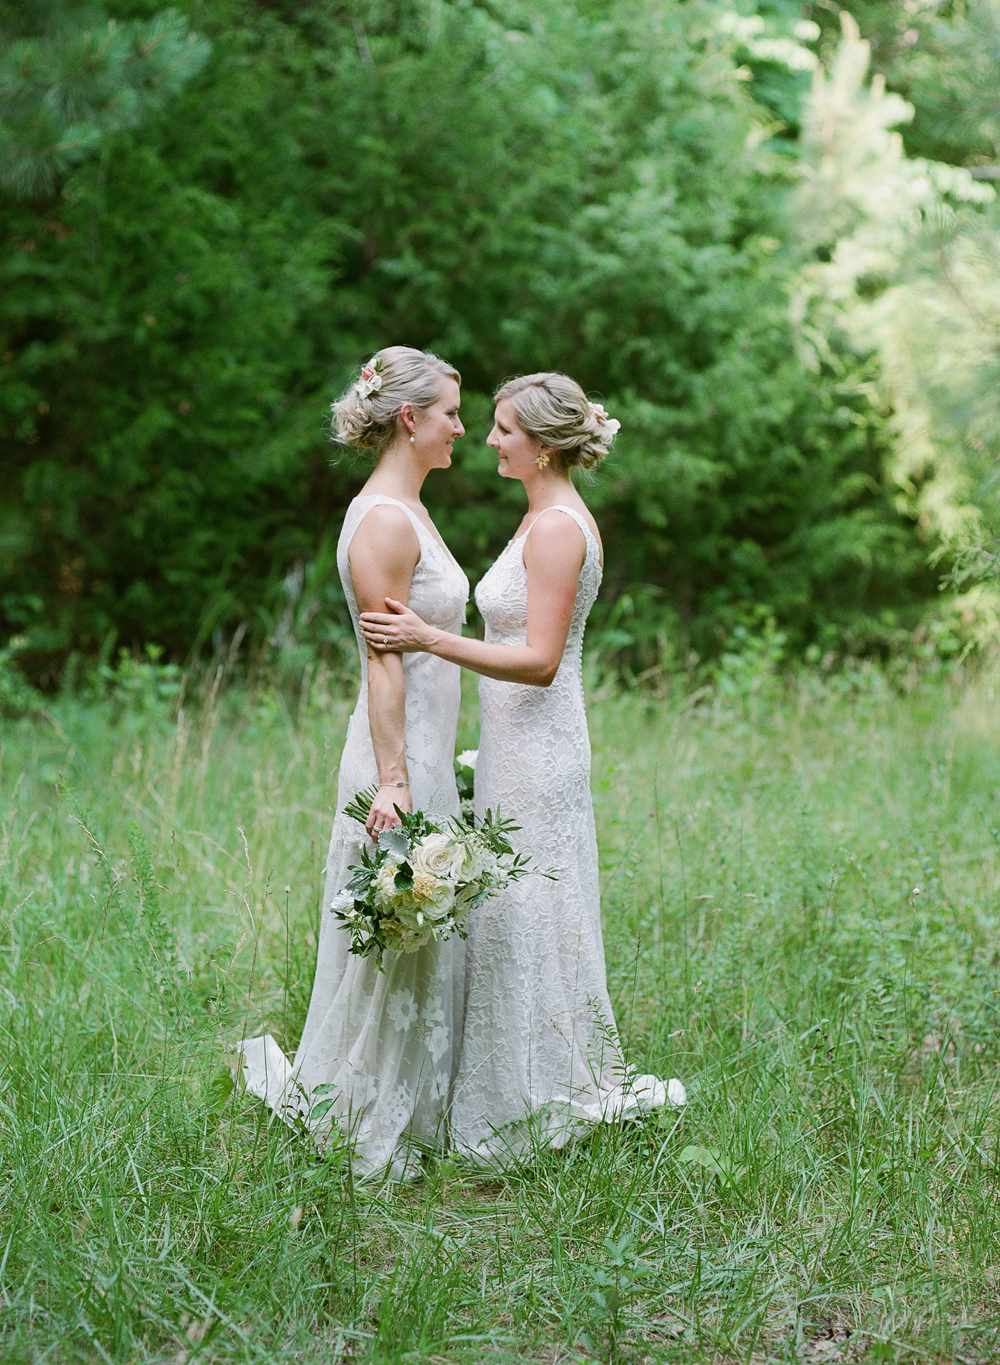 paige and kristine wedding brides embracing in field